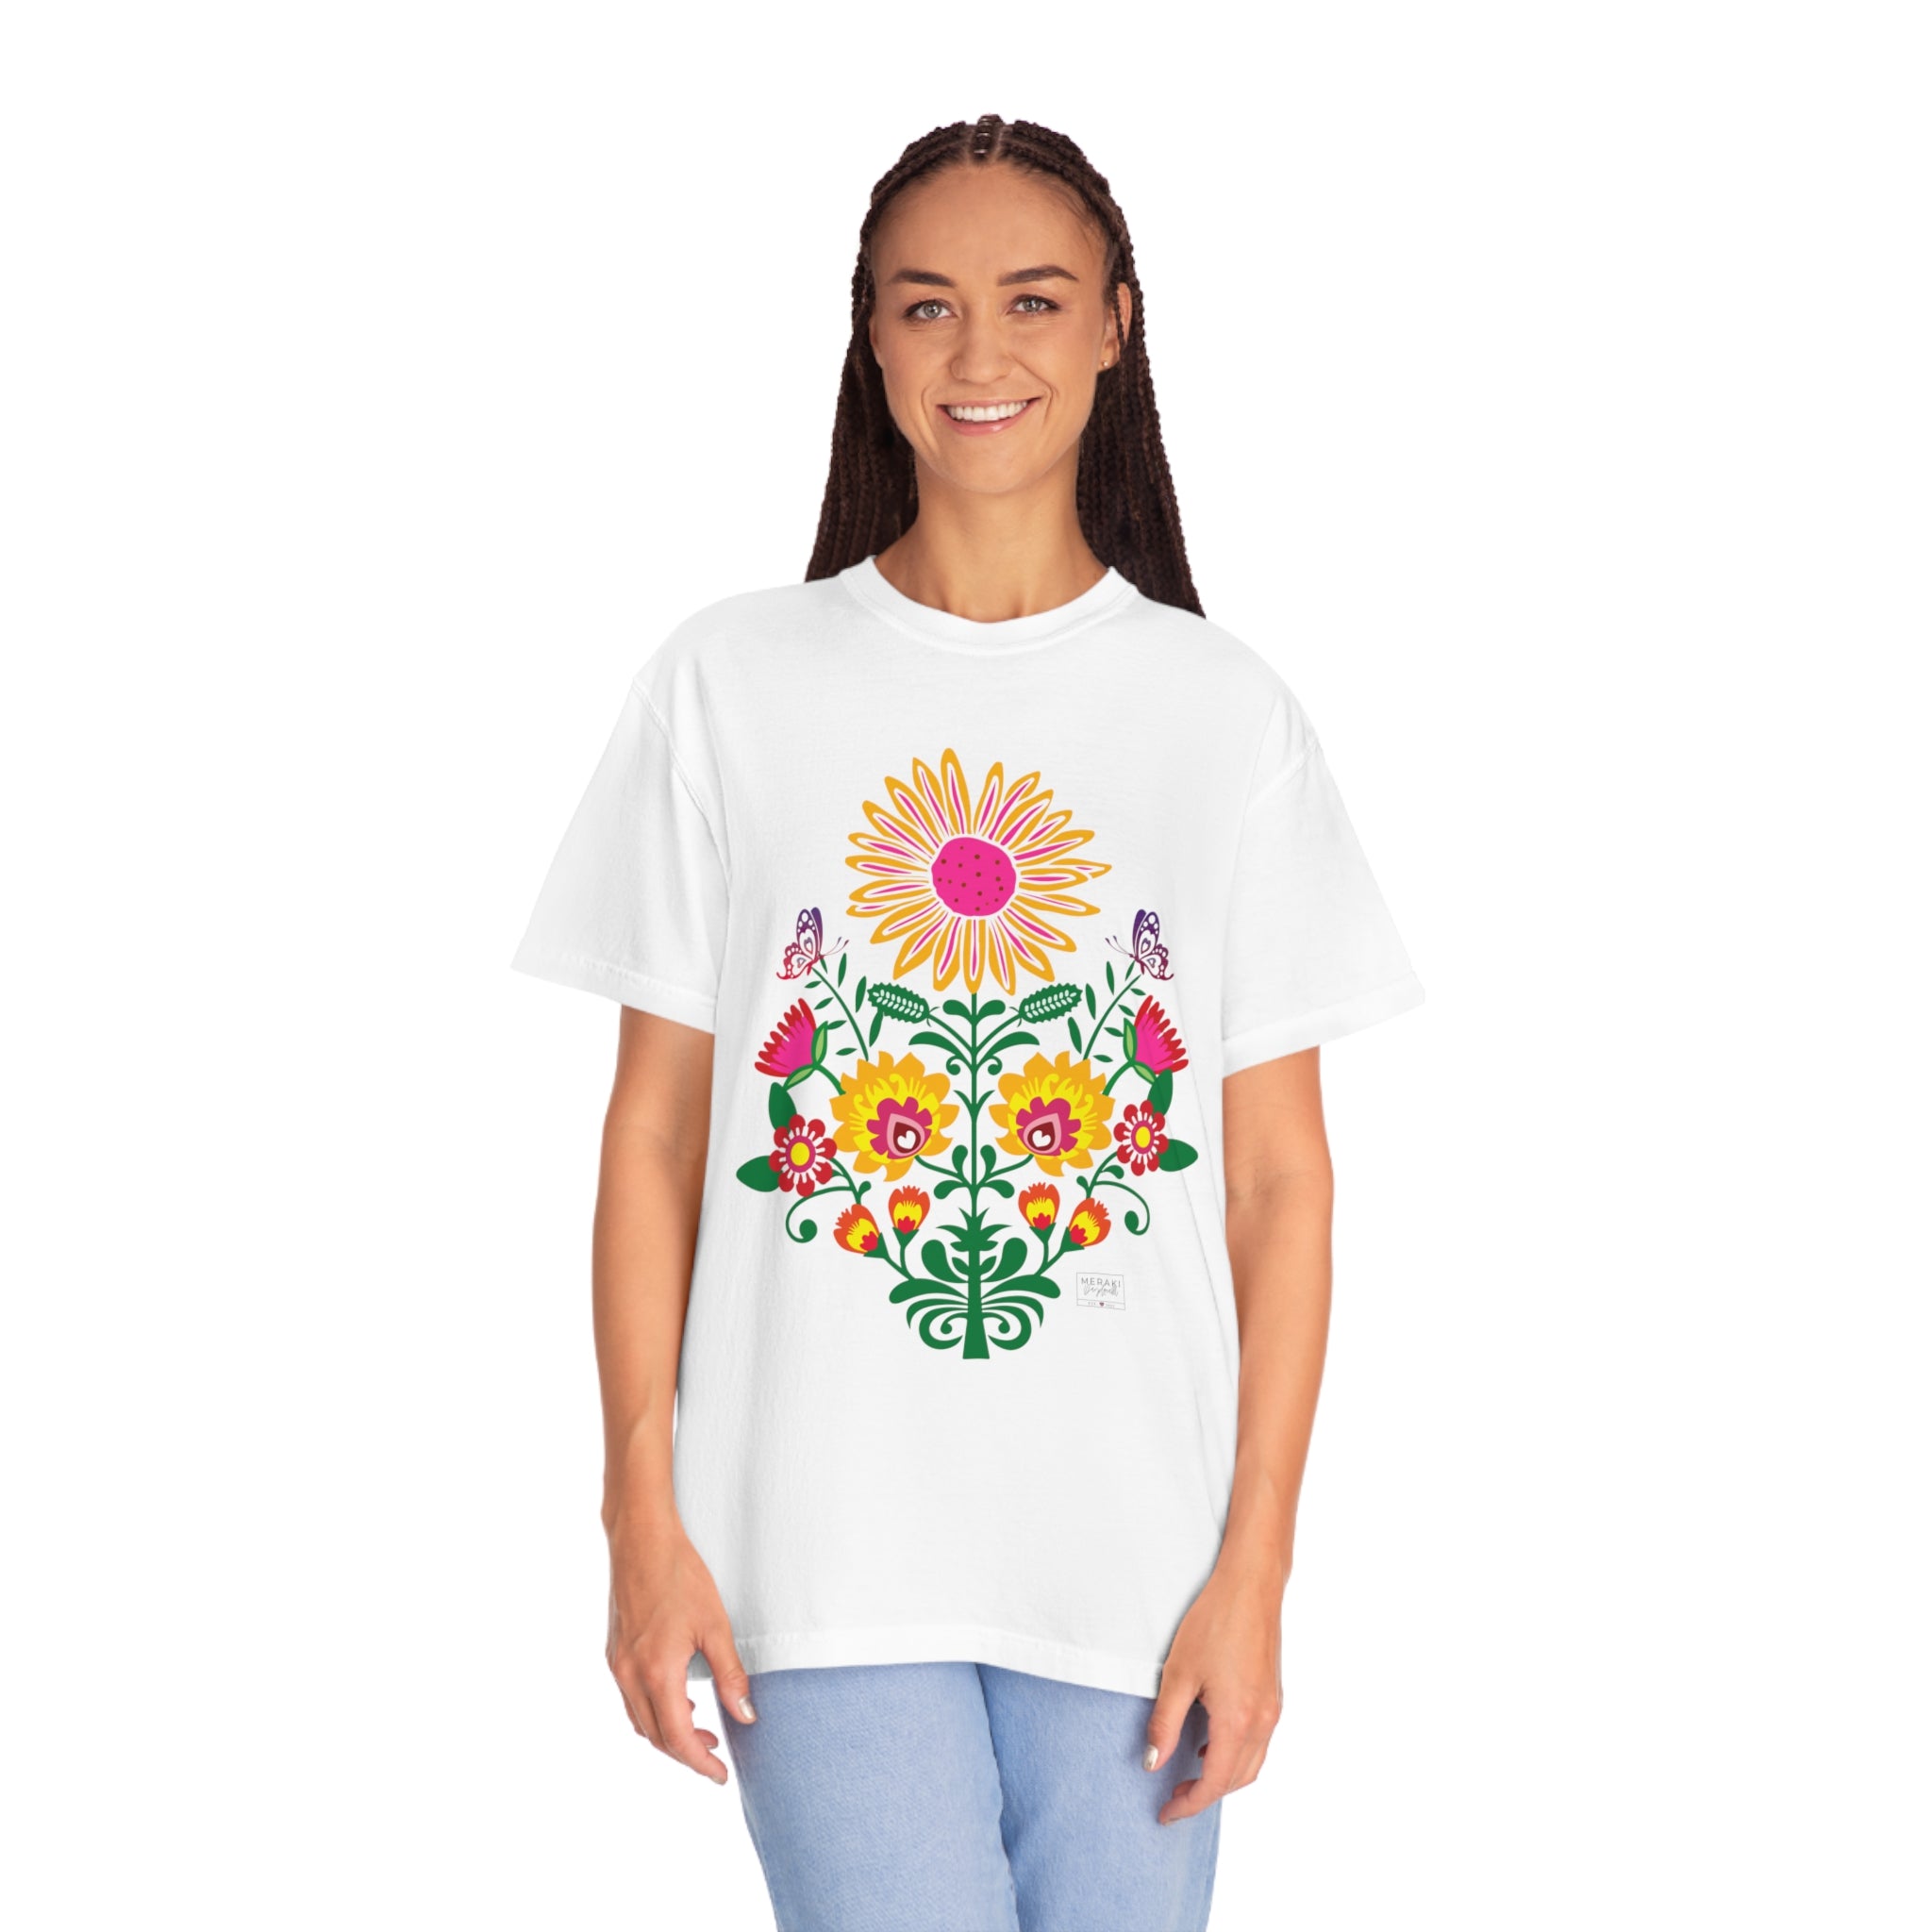 Unisex Psychedelic Flowers T-Shirt